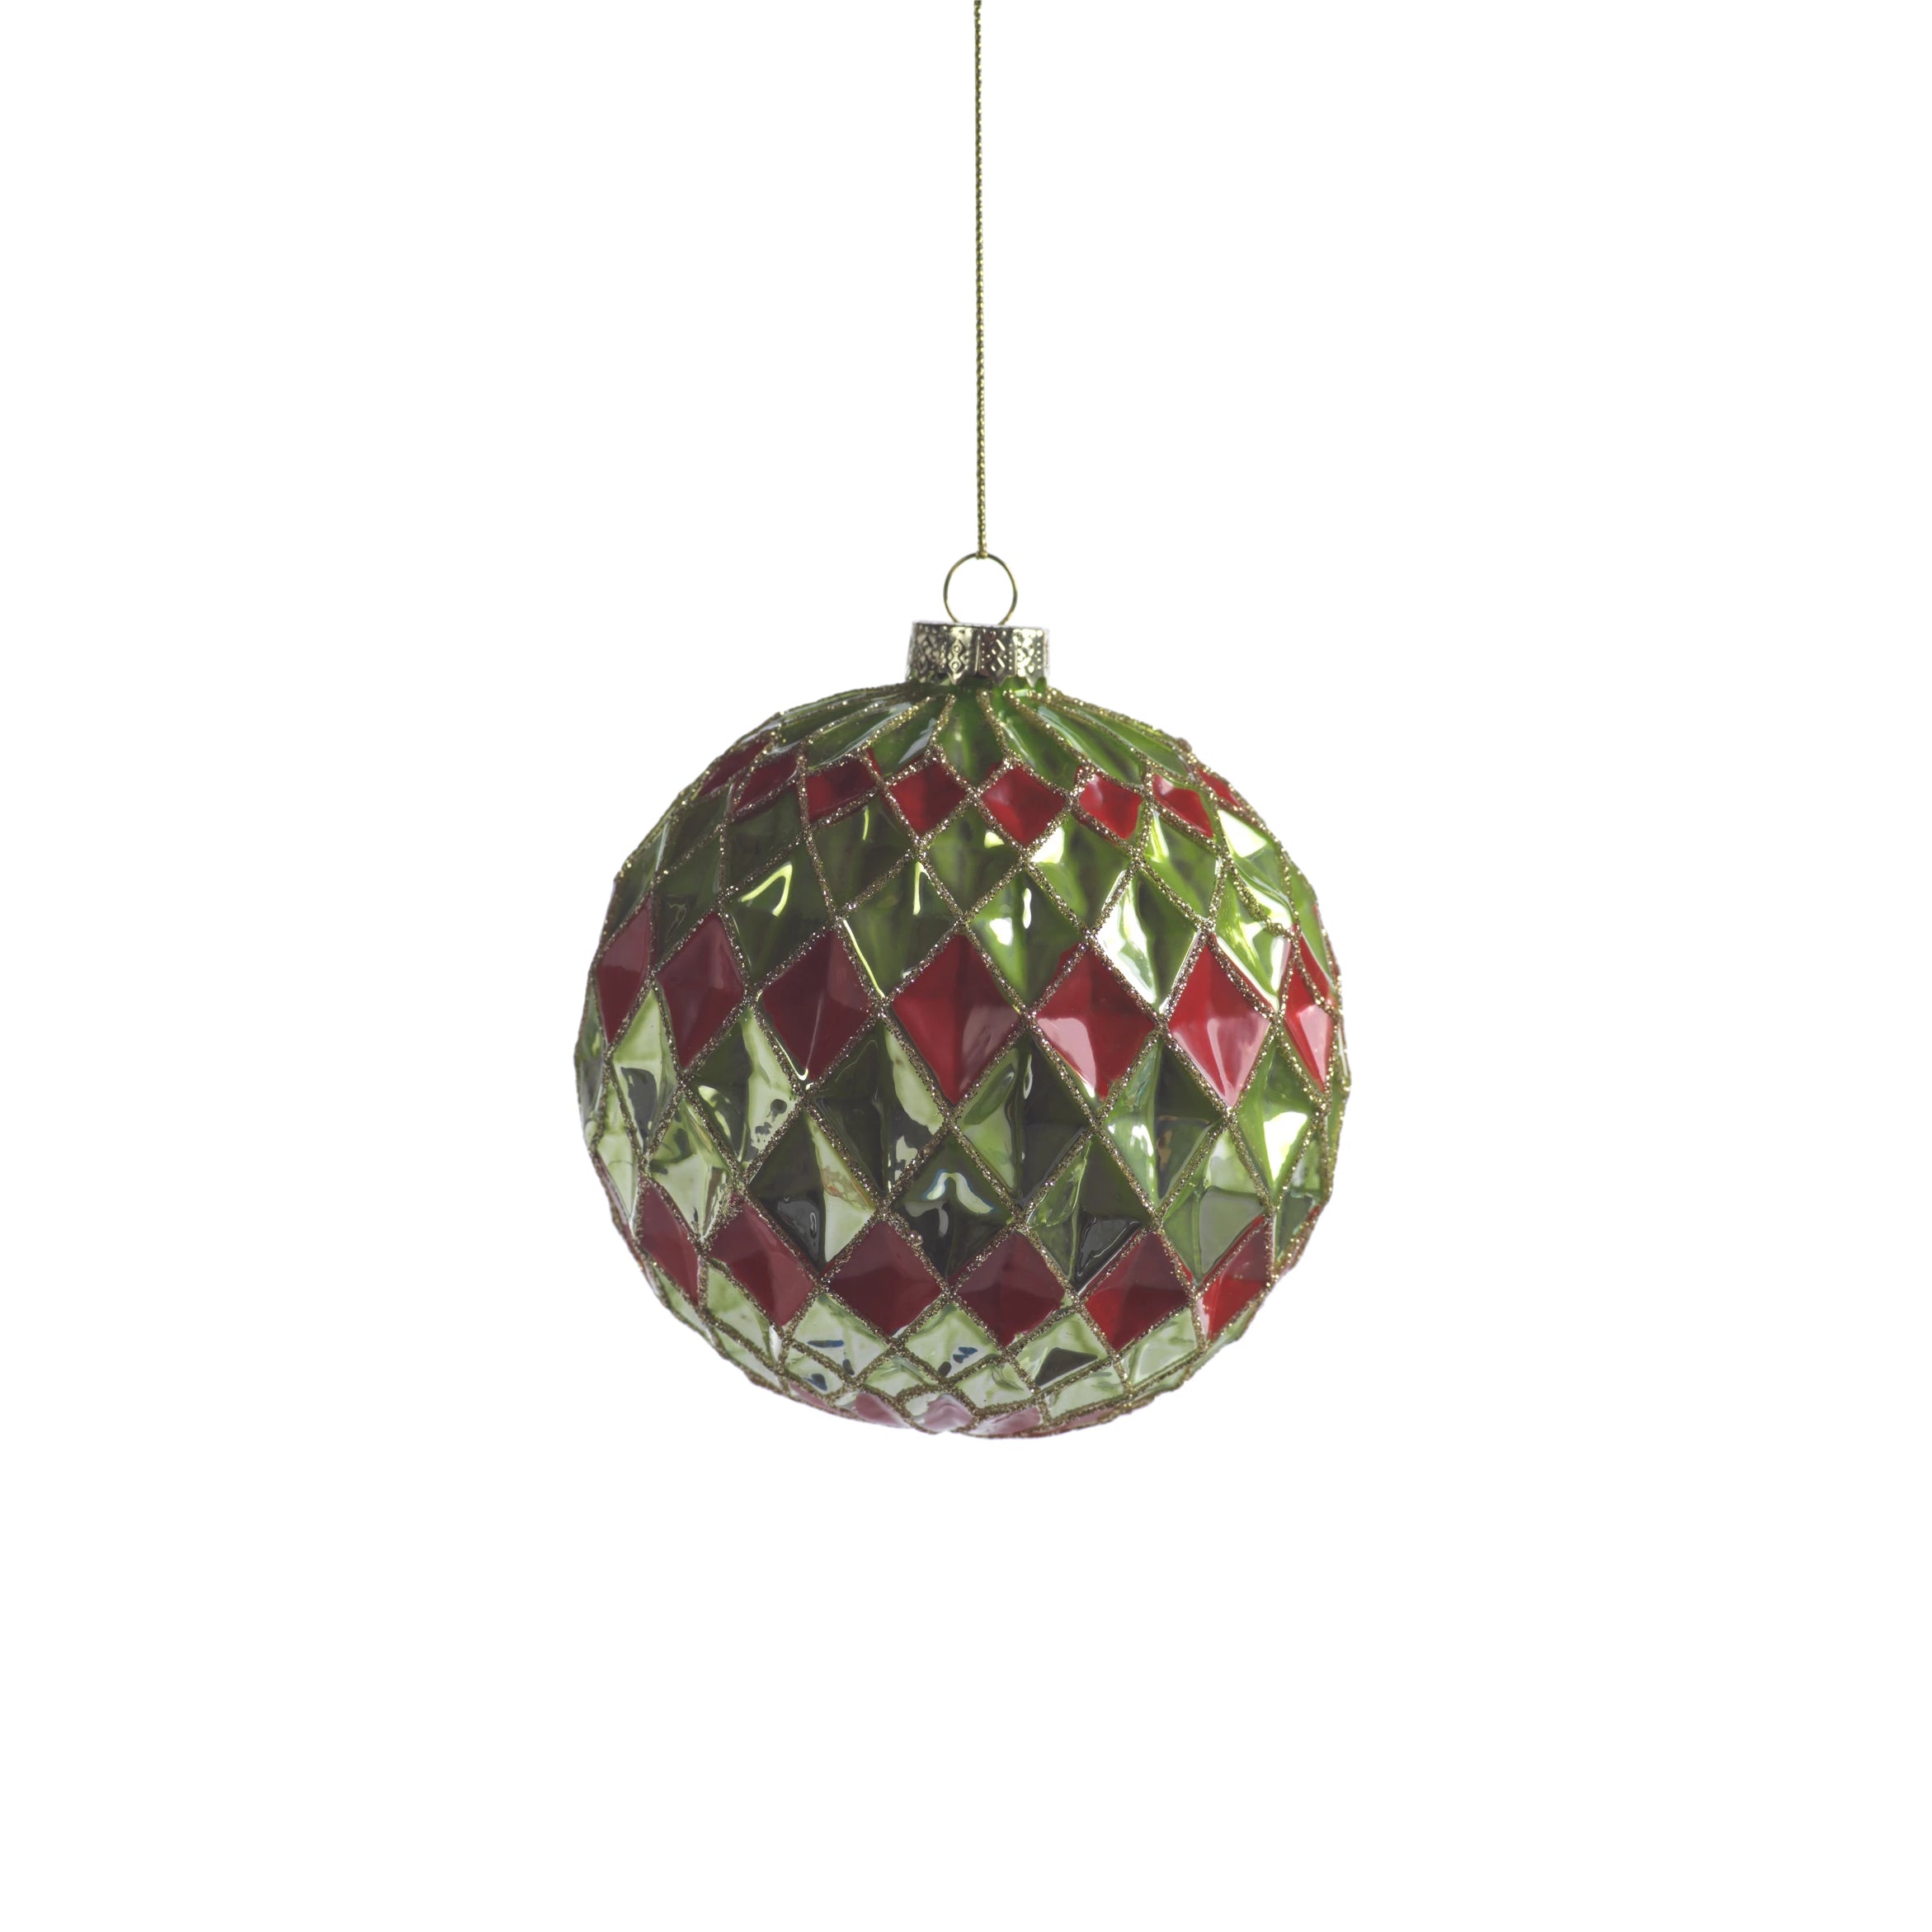 Carnival Ball Ornament - Green & Red - CARLYLE AVENUE